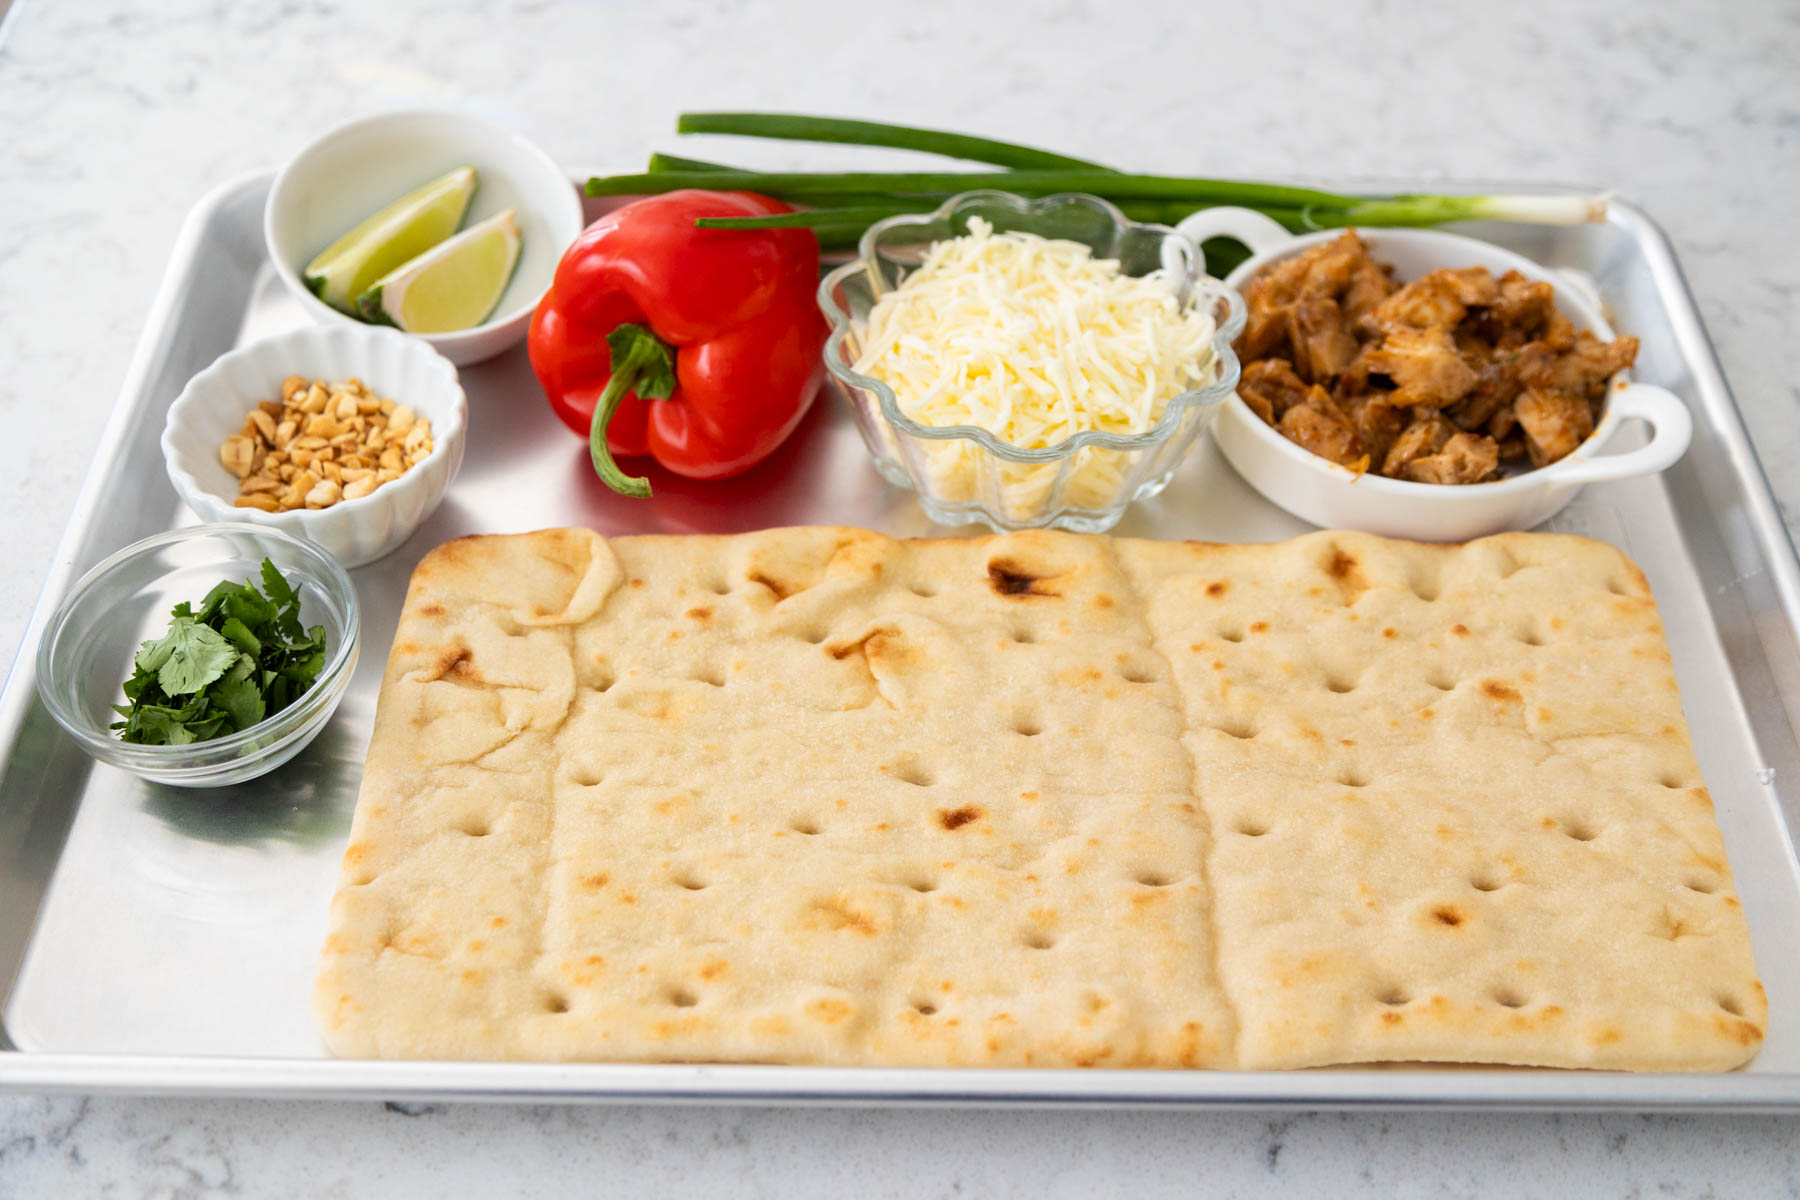 The ingredients to make the Thai chicken pizza are on a baking sheet.